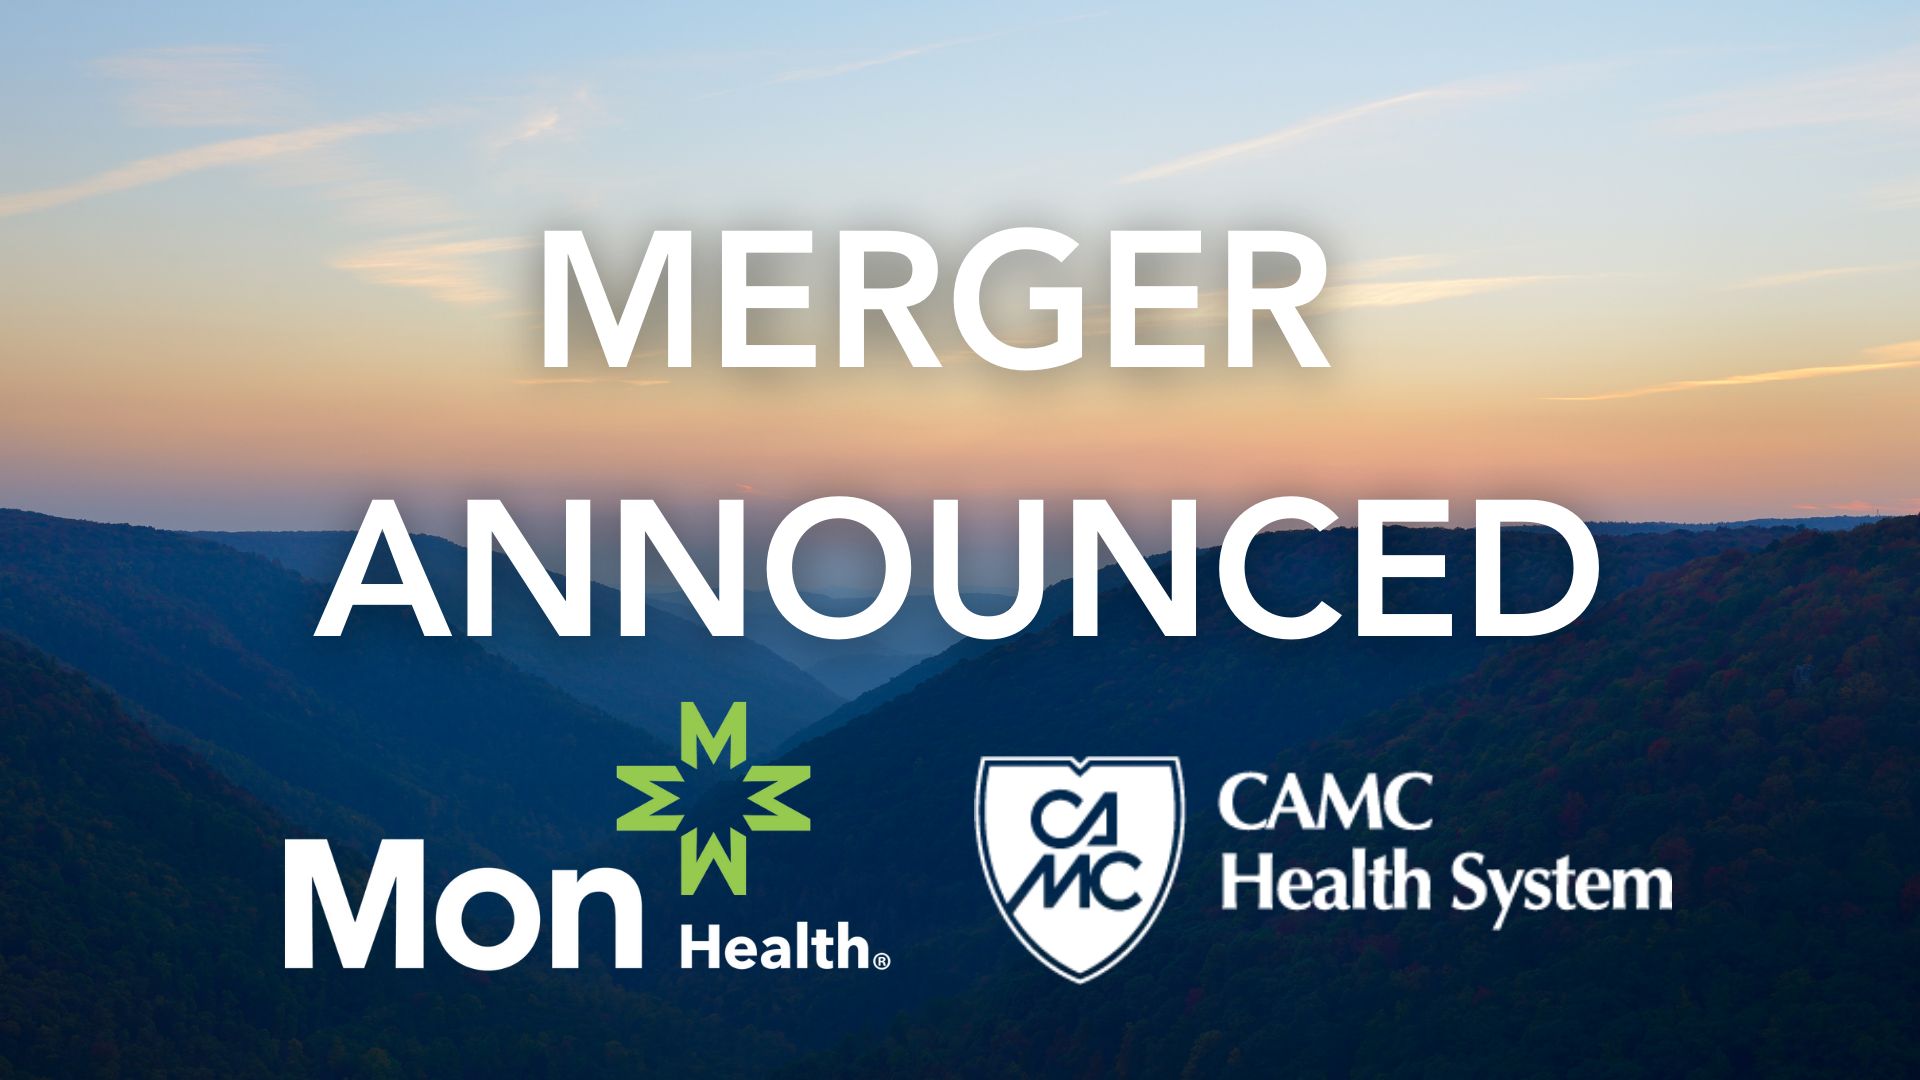 Mon Health System and CAMC Health System Merge